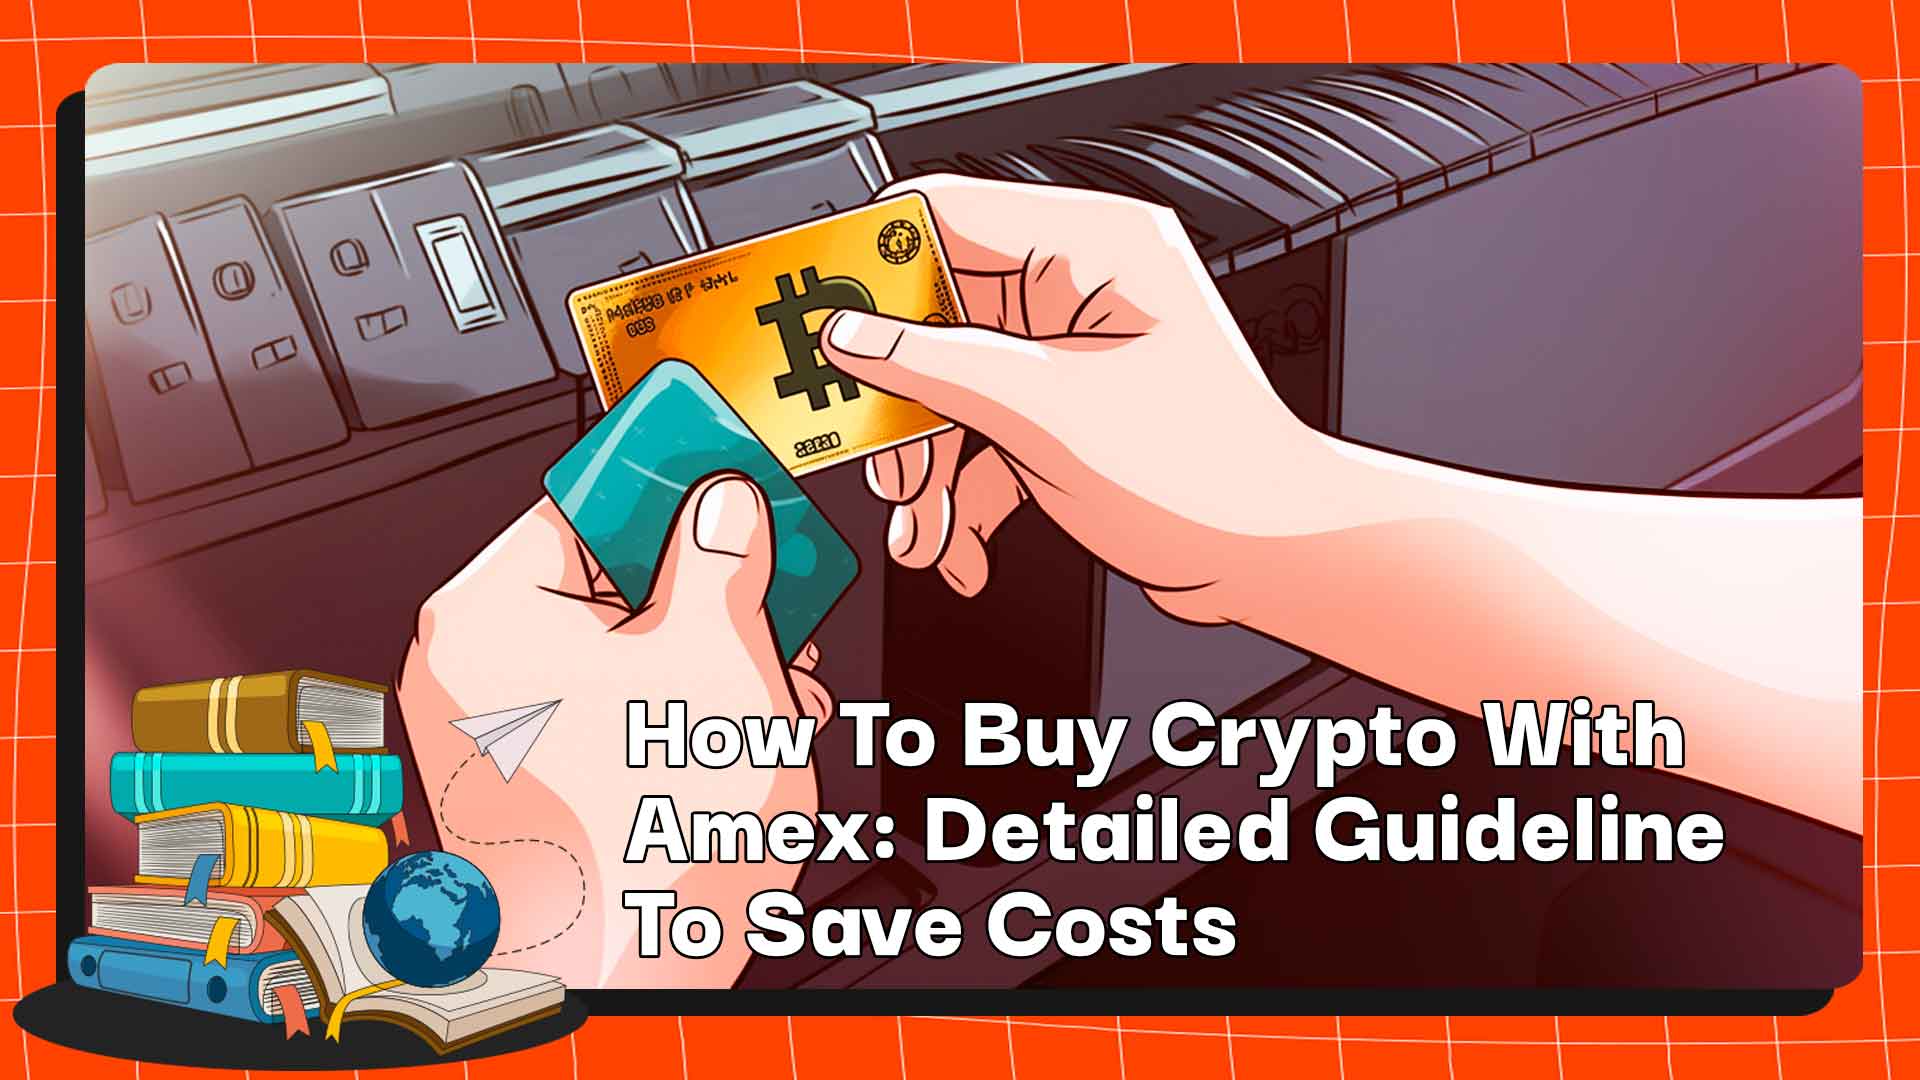 How To Buy Crypto With Amex: Detailed Guideline To Save Costs